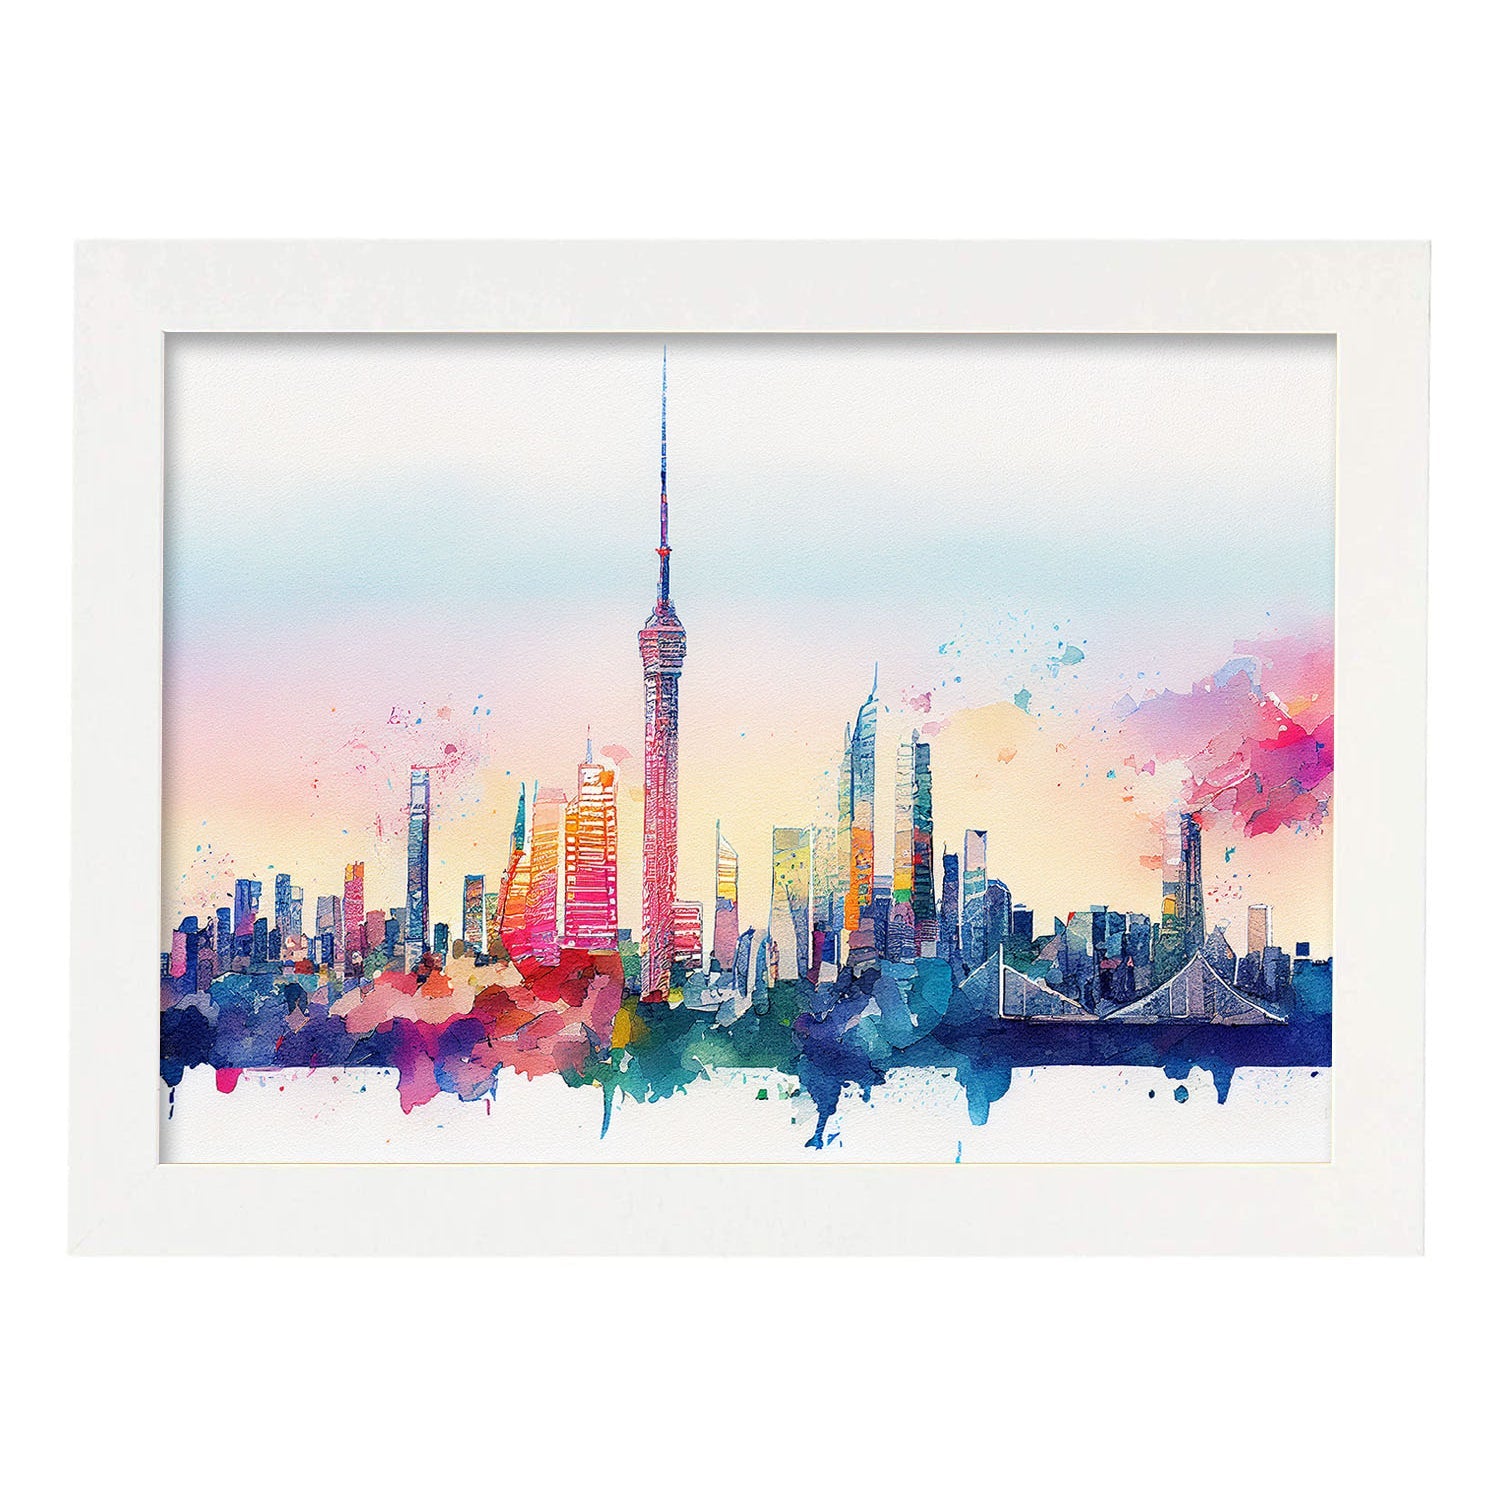 Nacnic watercolor of a skyline of the city of Tokyo_1. Aesthetic Wall Art Prints for Bedroom or Living Room Design.-Artwork-Nacnic-A4-Marco Blanco-Nacnic Estudio SL